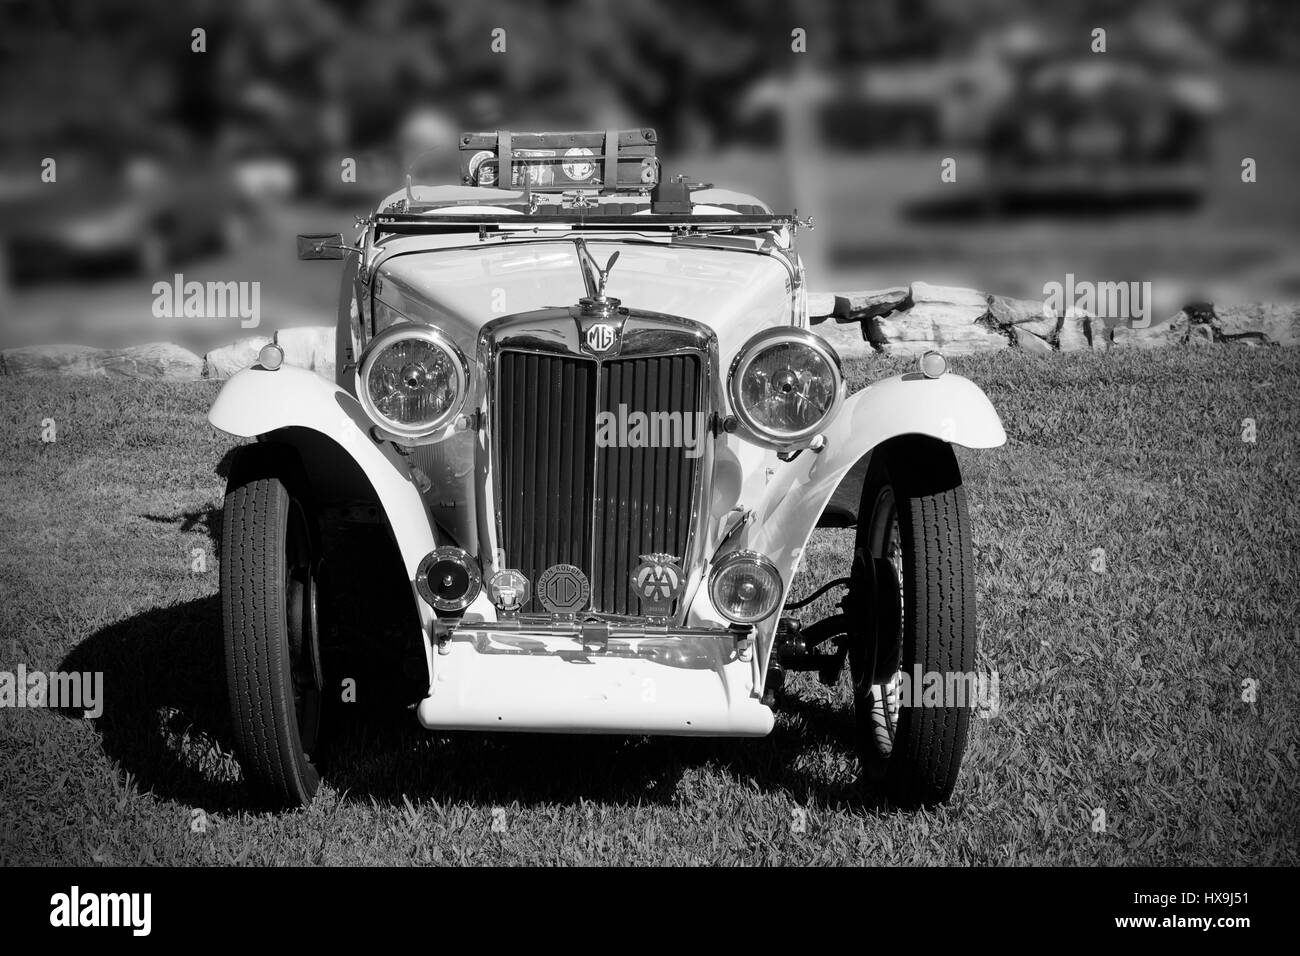 Front view of vintage 1950 MG TD roadster Stock Photo